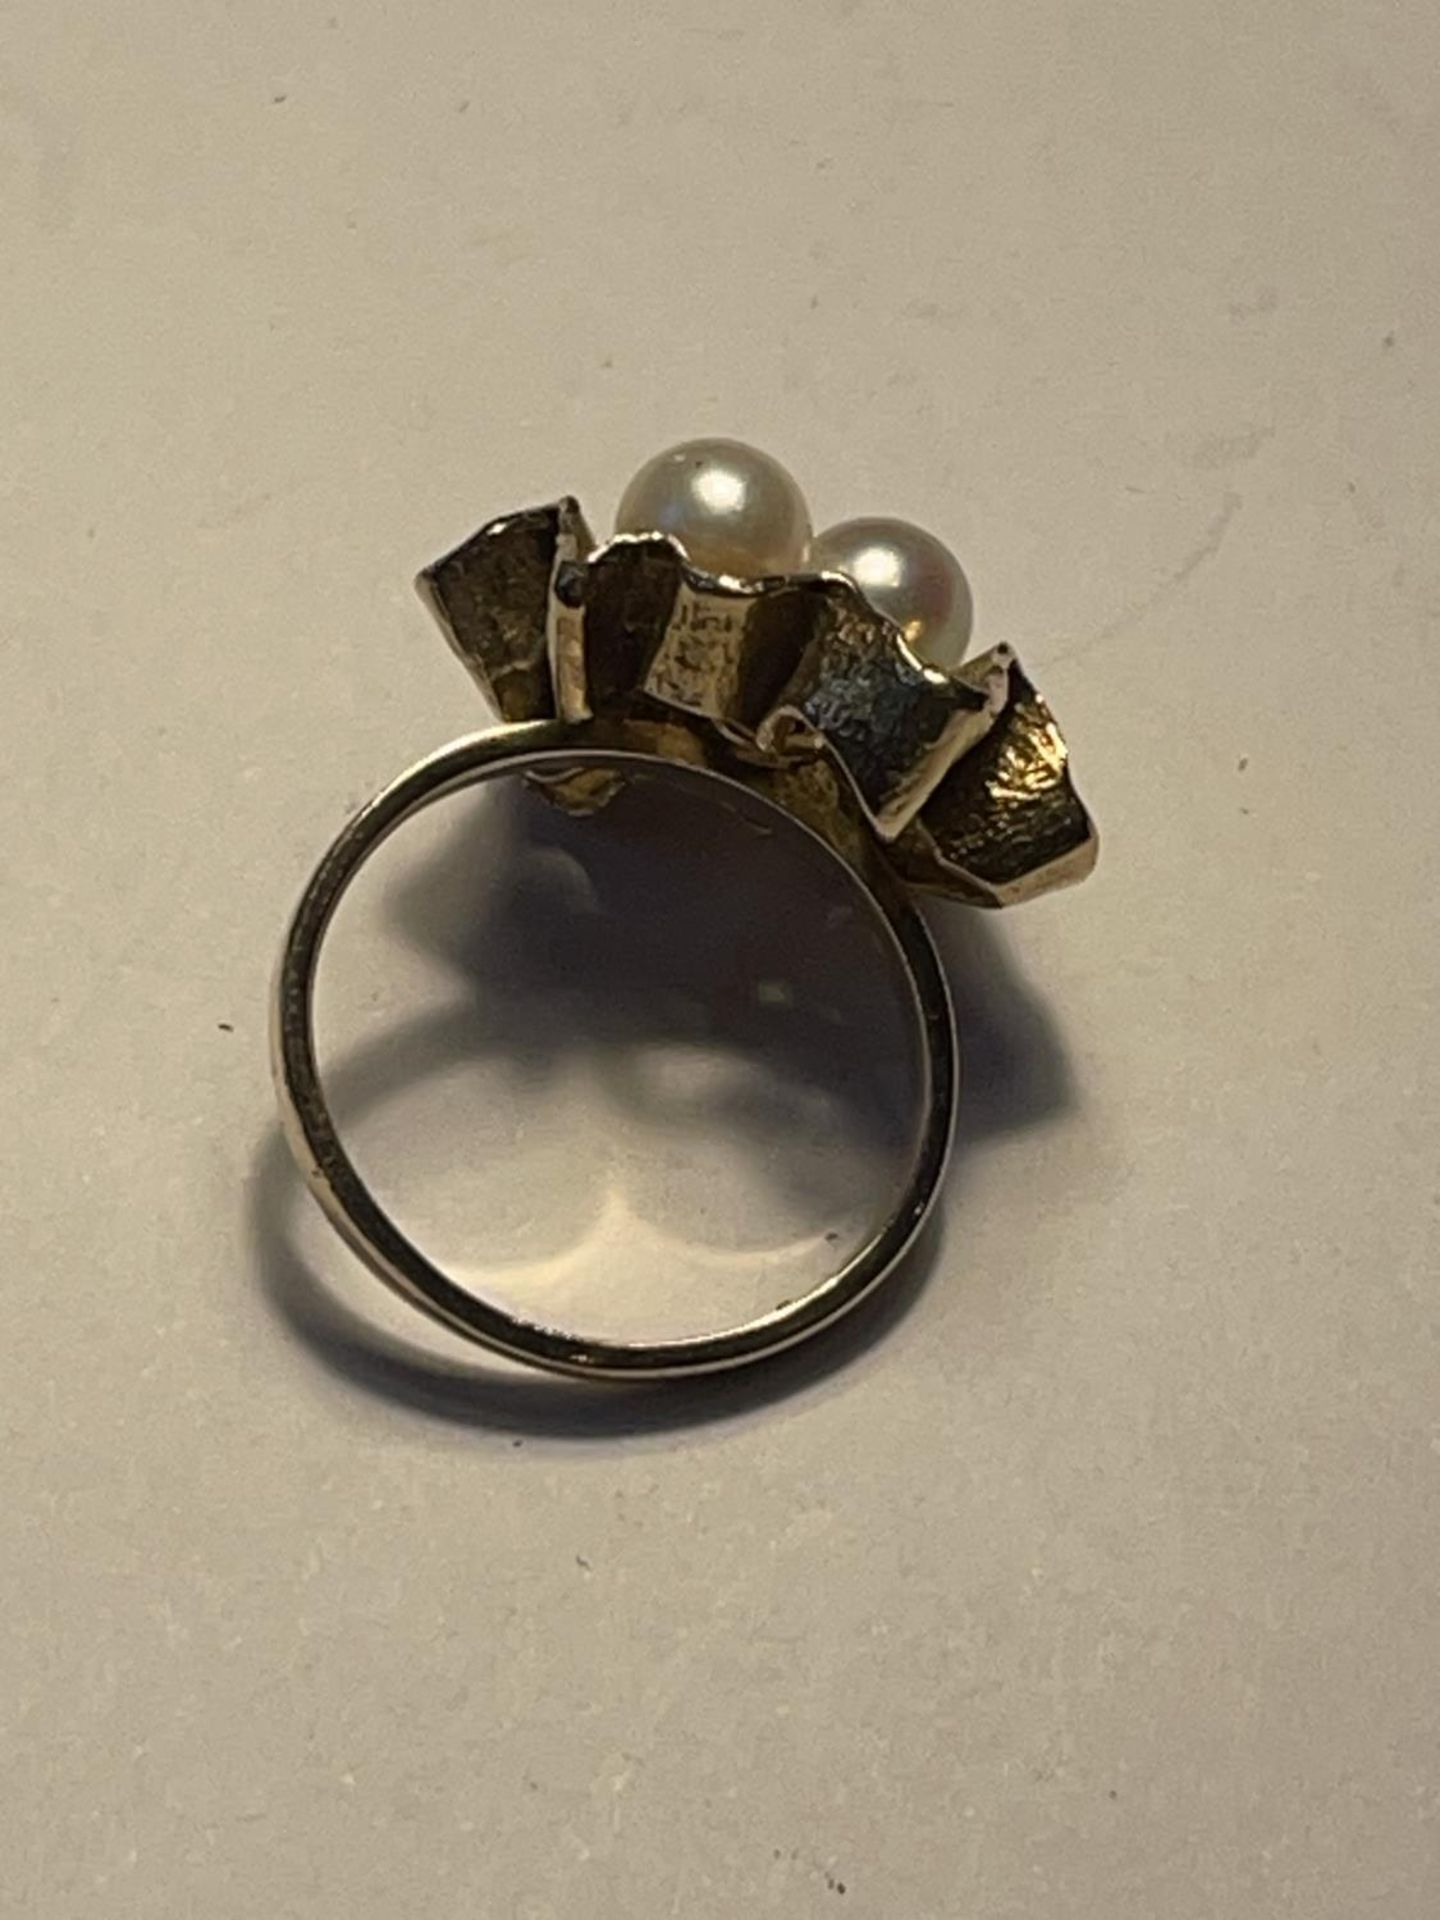 A 9CT YELLOW GOLD AND PEARL RING SIZE K, WEIGHT 4.44 GRAMS - Image 3 of 3